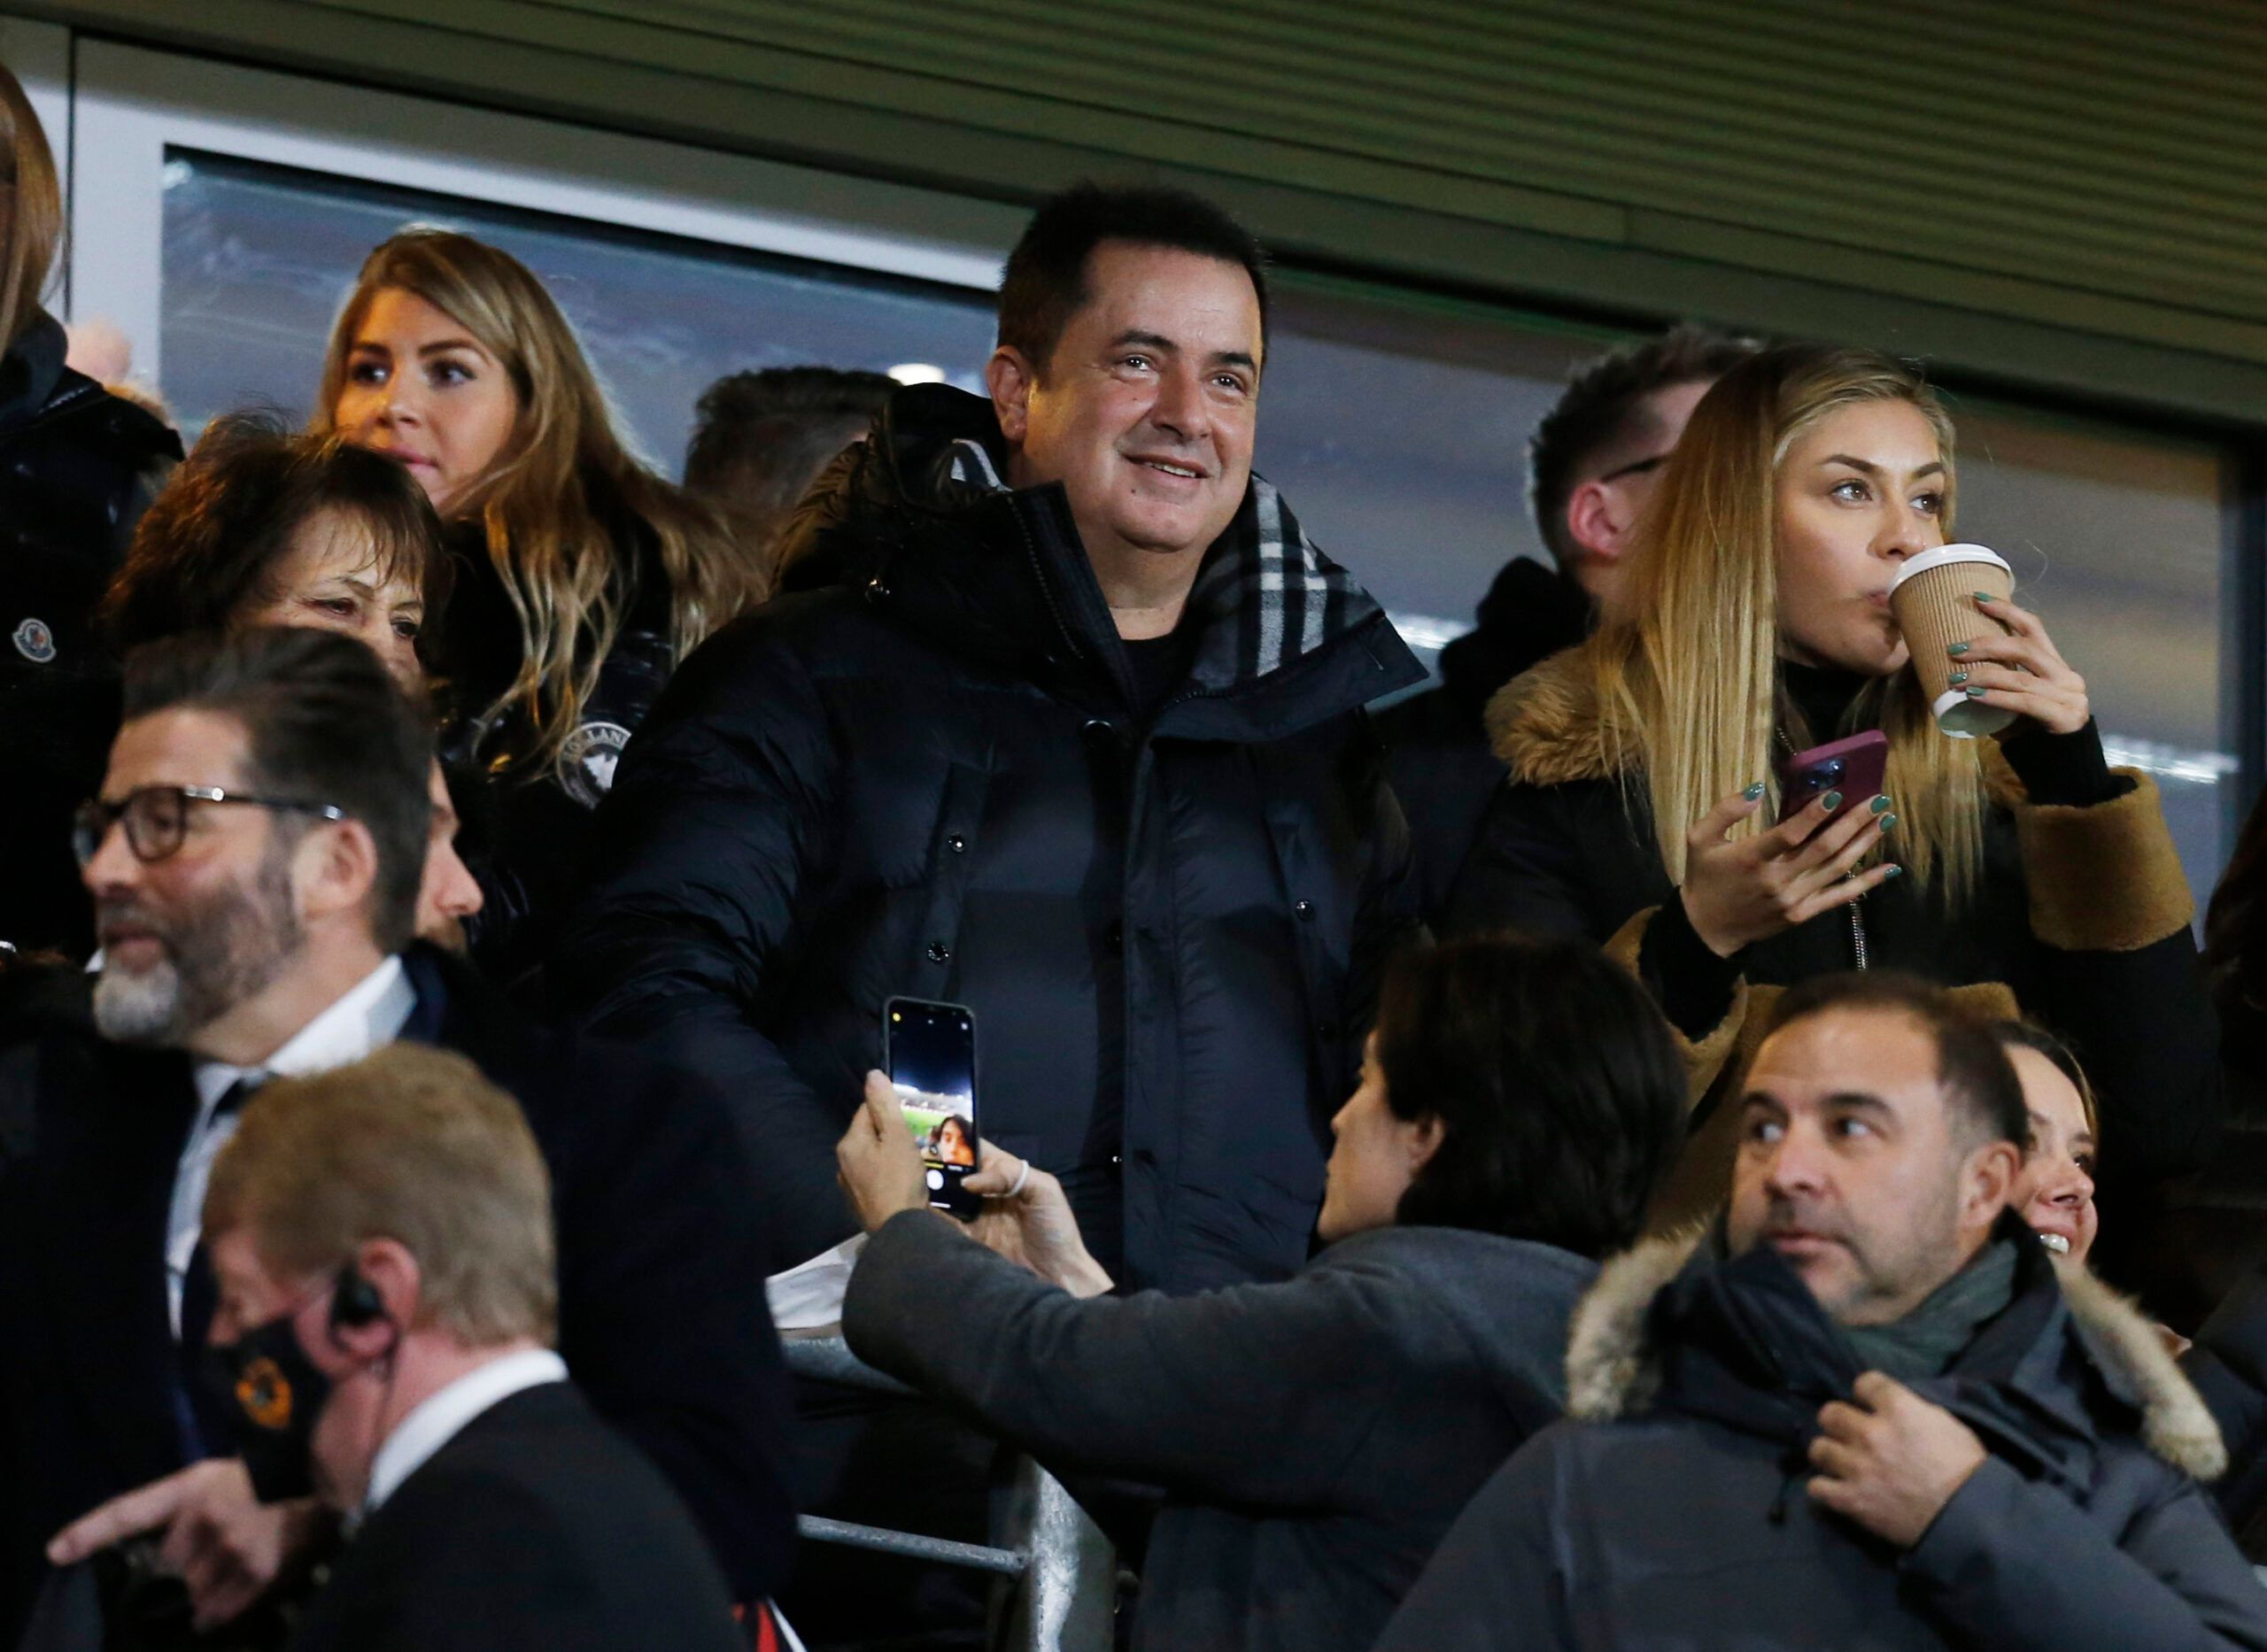 Soccer Football - FA Cup Third Round - Hull City v Everton - KCOM Stadium, Hull, Britain - January 8, 2022 Businessman Acun Ilıcalı is seen in the stand before the match Action Images via Reuters/Ed Sykes